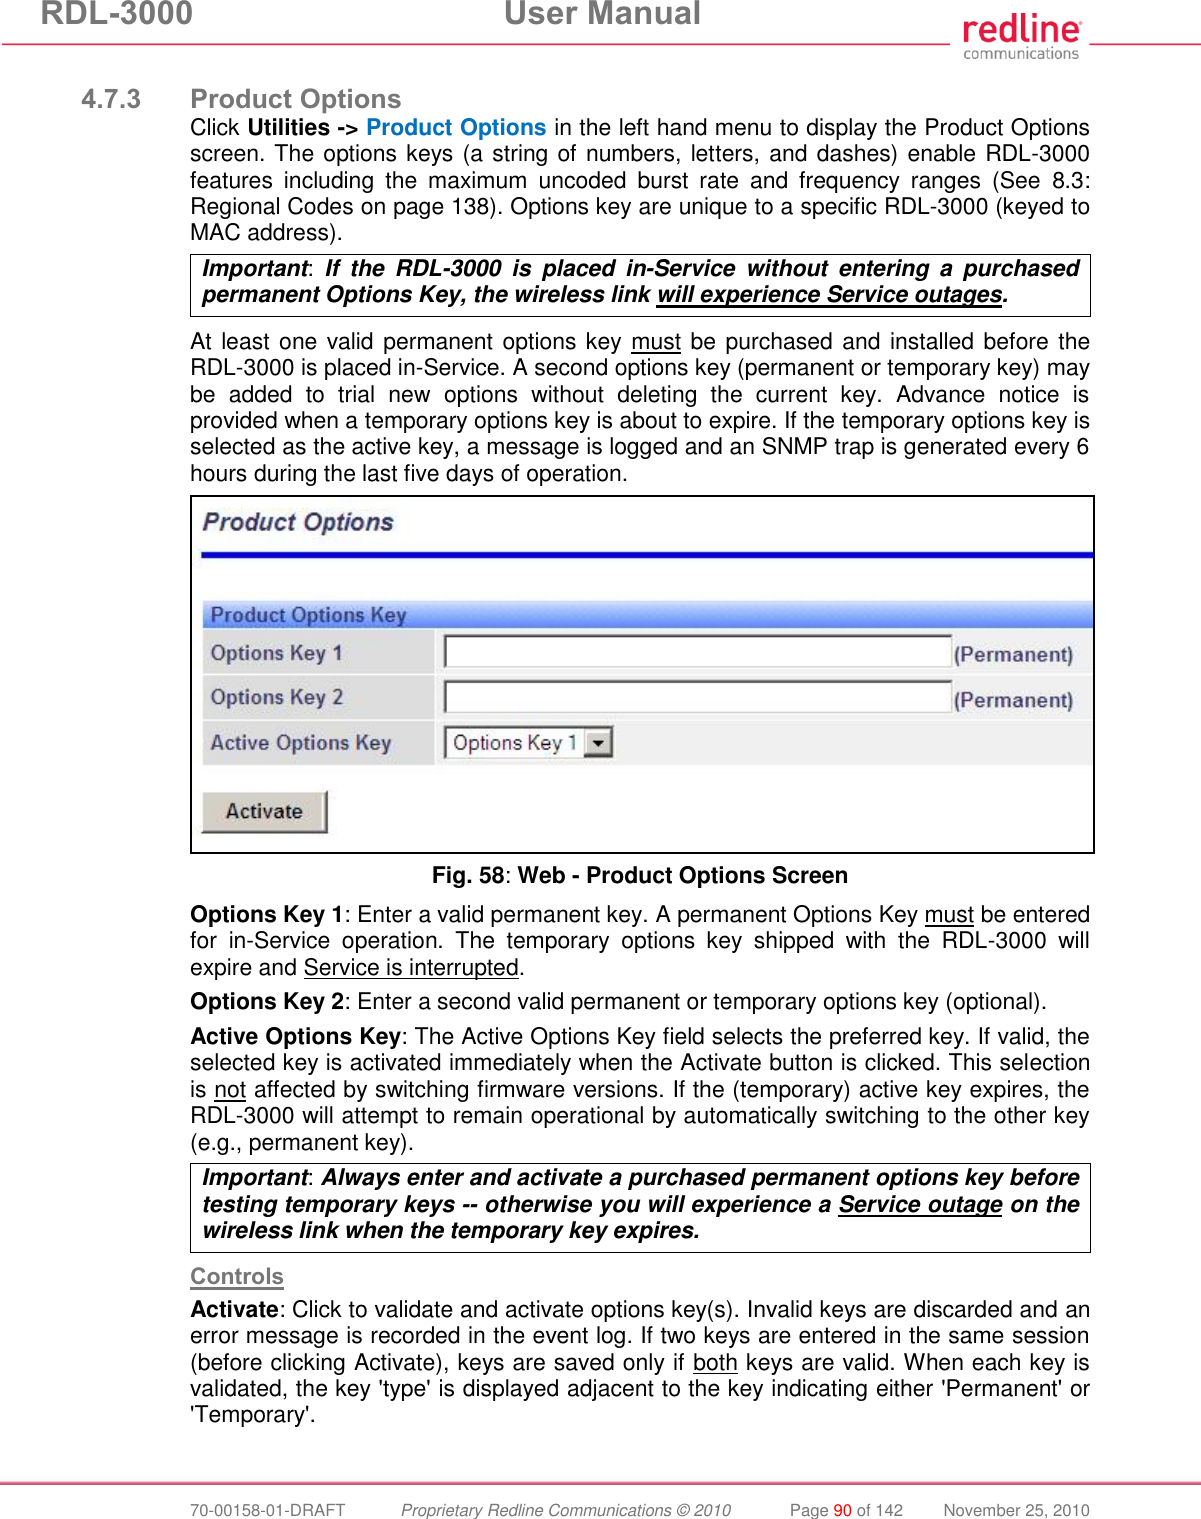 RDL-3000  User Manual  70-00158-01-DRAFT  Proprietary Redline Communications © 2010  Page 90 of 142  November 25, 2010  4.7.3 Product Options Click Utilities -&gt; Product Options in the left hand menu to display the Product Options screen. The options keys (a string of numbers, letters, and dashes) enable RDL-3000 features  including  the  maximum  uncoded  burst  rate  and  frequency  ranges  (See  8.3: Regional Codes on page 138). Options key are unique to a specific RDL-3000 (keyed to MAC address). Important:  If  the  RDL-3000  is  placed  in-Service  without  entering  a  purchased permanent Options Key, the wireless link will experience Service outages.  At least one valid permanent options key must be purchased and installed before the RDL-3000 is placed in-Service. A second options key (permanent or temporary key) may be  added  to  trial  new  options  without  deleting  the  current  key.  Advance  notice  is provided when a temporary options key is about to expire. If the temporary options key is selected as the active key, a message is logged and an SNMP trap is generated every 6 hours during the last five days of operation.  Fig. 58: Web - Product Options Screen Options Key 1: Enter a valid permanent key. A permanent Options Key must be entered for  in-Service  operation.  The  temporary  options  key  shipped  with  the  RDL-3000  will expire and Service is interrupted.  Options Key 2: Enter a second valid permanent or temporary options key (optional). Active Options Key: The Active Options Key field selects the preferred key. If valid, the selected key is activated immediately when the Activate button is clicked. This selection is not affected by switching firmware versions. If the (temporary) active key expires, the RDL-3000 will attempt to remain operational by automatically switching to the other key (e.g., permanent key). Important: Always enter and activate a purchased permanent options key before testing temporary keys -- otherwise you will experience a Service outage on the wireless link when the temporary key expires.  Controls Activate: Click to validate and activate options key(s). Invalid keys are discarded and an error message is recorded in the event log. If two keys are entered in the same session (before clicking Activate), keys are saved only if both keys are valid. When each key is validated, the key &apos;type&apos; is displayed adjacent to the key indicating either &apos;Permanent&apos; or &apos;Temporary&apos;. 